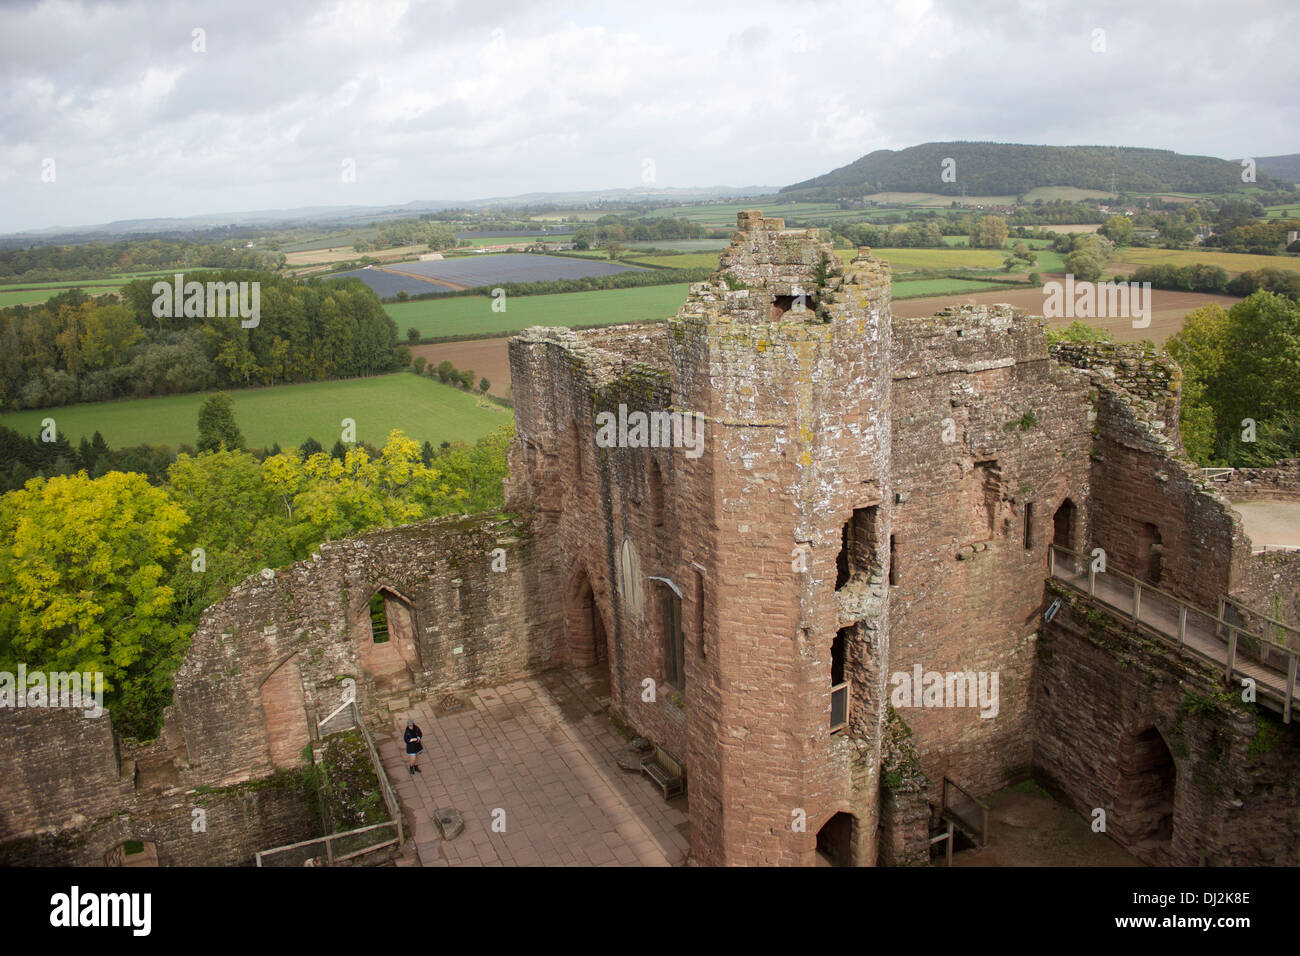 View from the top of Goodrich Castle, a now ruinous Norman medieval castle situated in the village of Goodrich in Herefordshire. Stock Photo